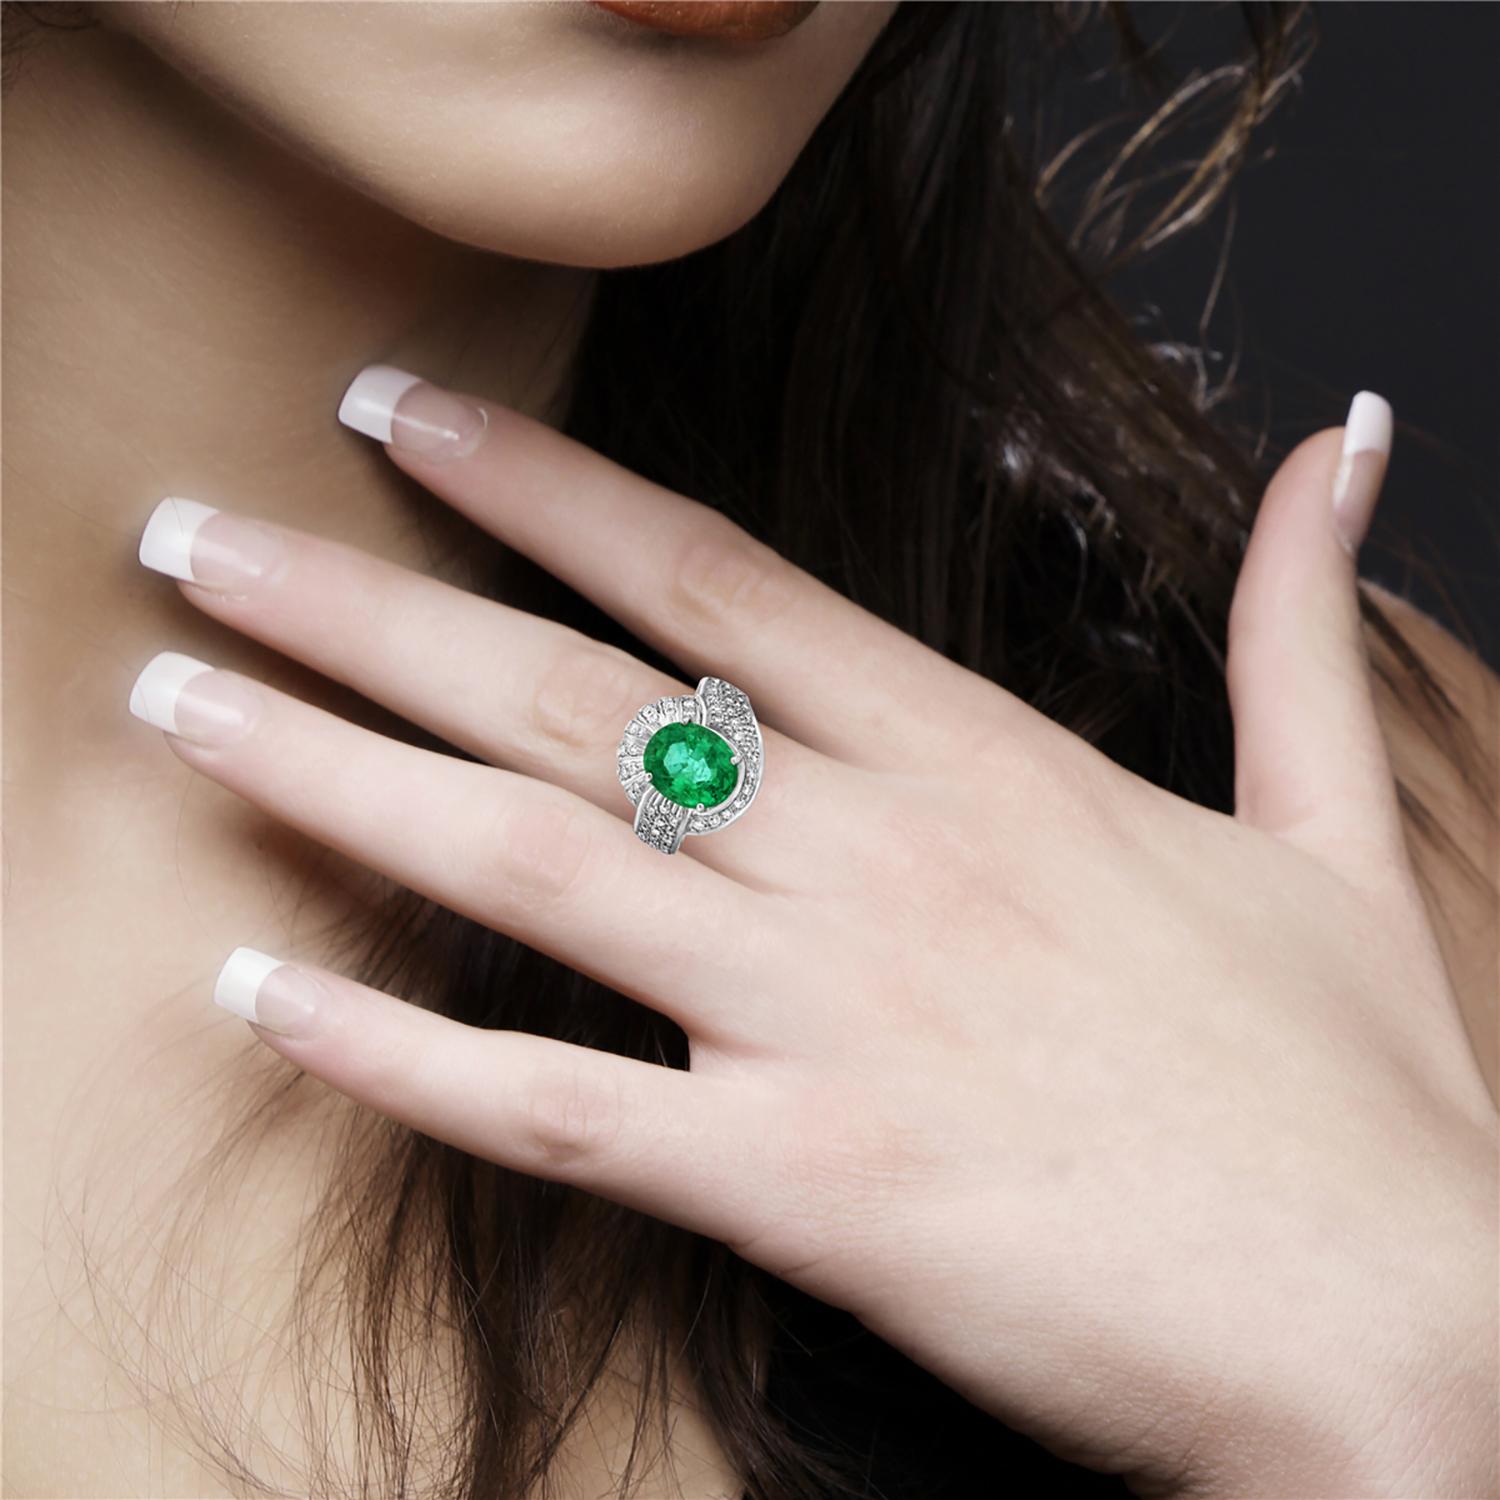 Make a statement with this stunning cocktail ring, featuring a vibrant oval-shaped Zambian emerald set in a luxurious 18k white gold band. The emerald's rich green hue is sure to turn heads, while the elegant setting enhances its beauty and